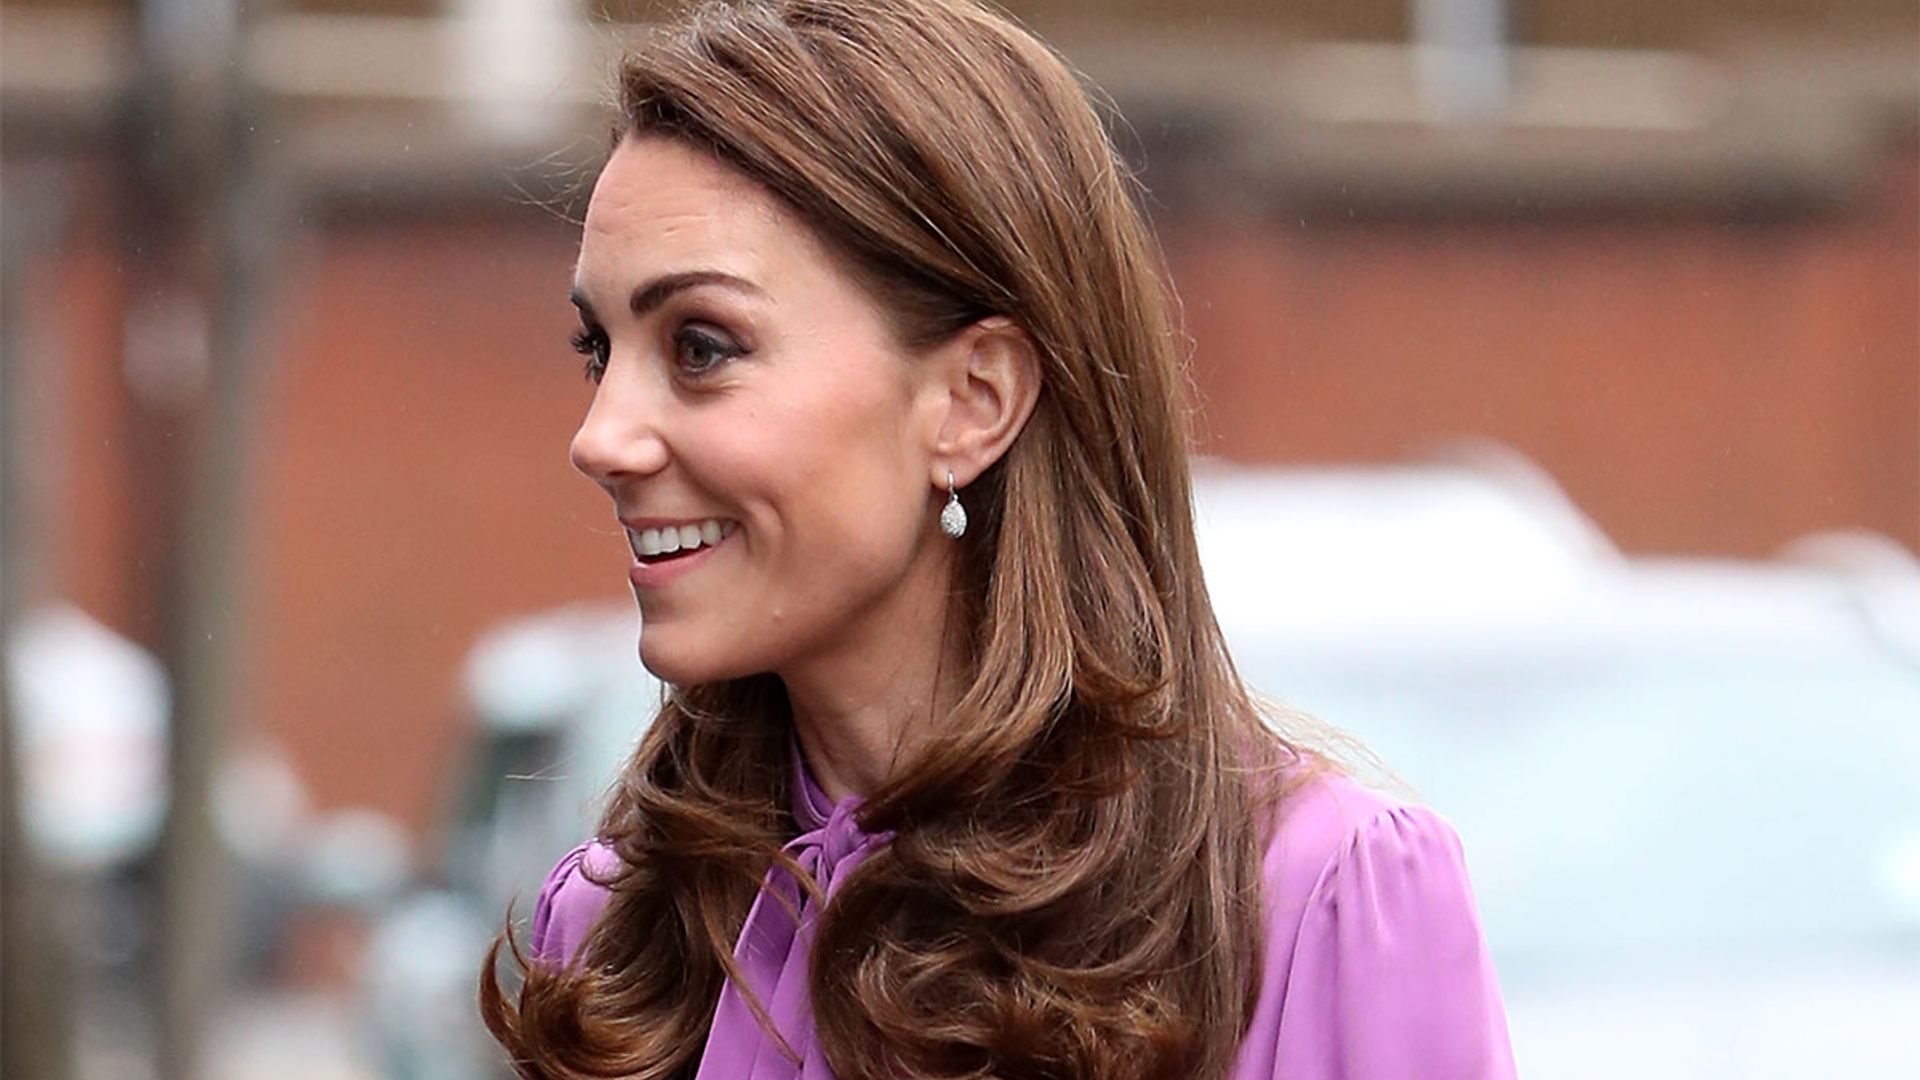 Kate Middleton Wears Gucci Gown Ahead of Valentine's Day